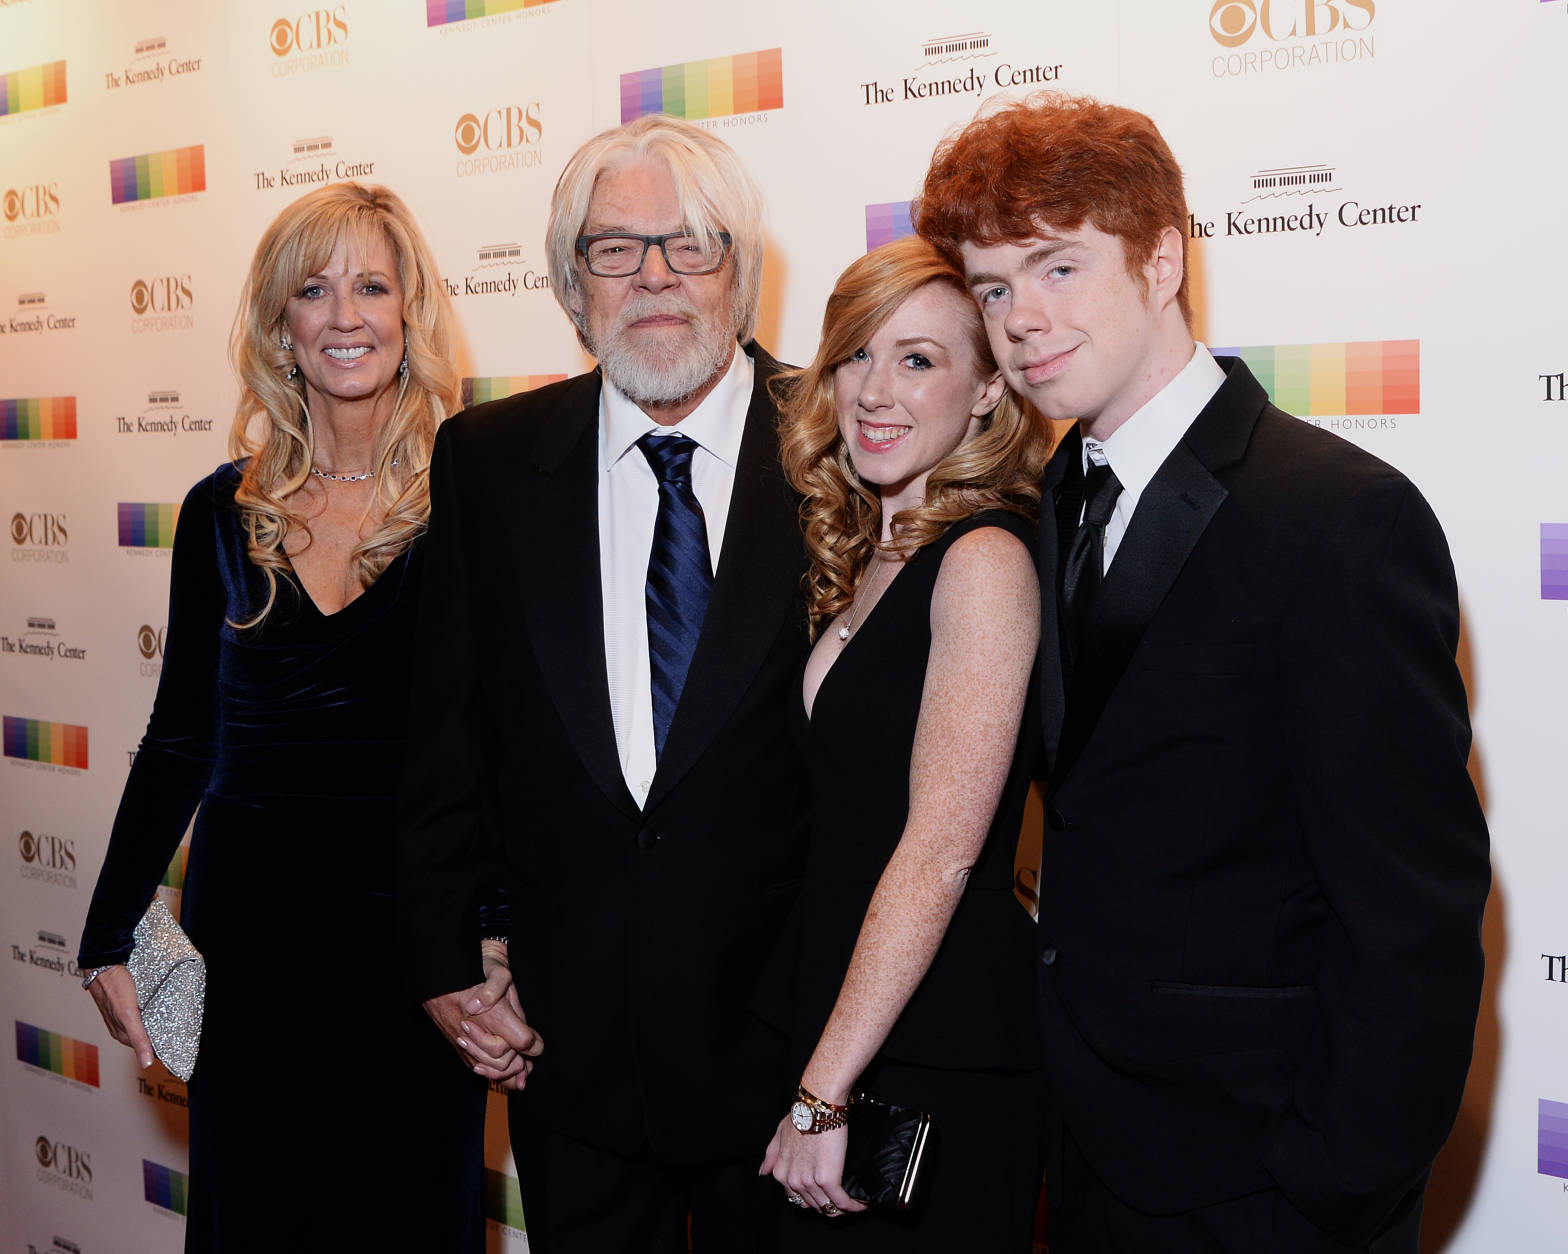 Singer Bob Seger with his wife Juanita Dorricott and their family. (Courtesy Shannon Finney, <a href="http://www.shannonfinneyphotography.com">www.shannonfinneyphotography.com</a>)